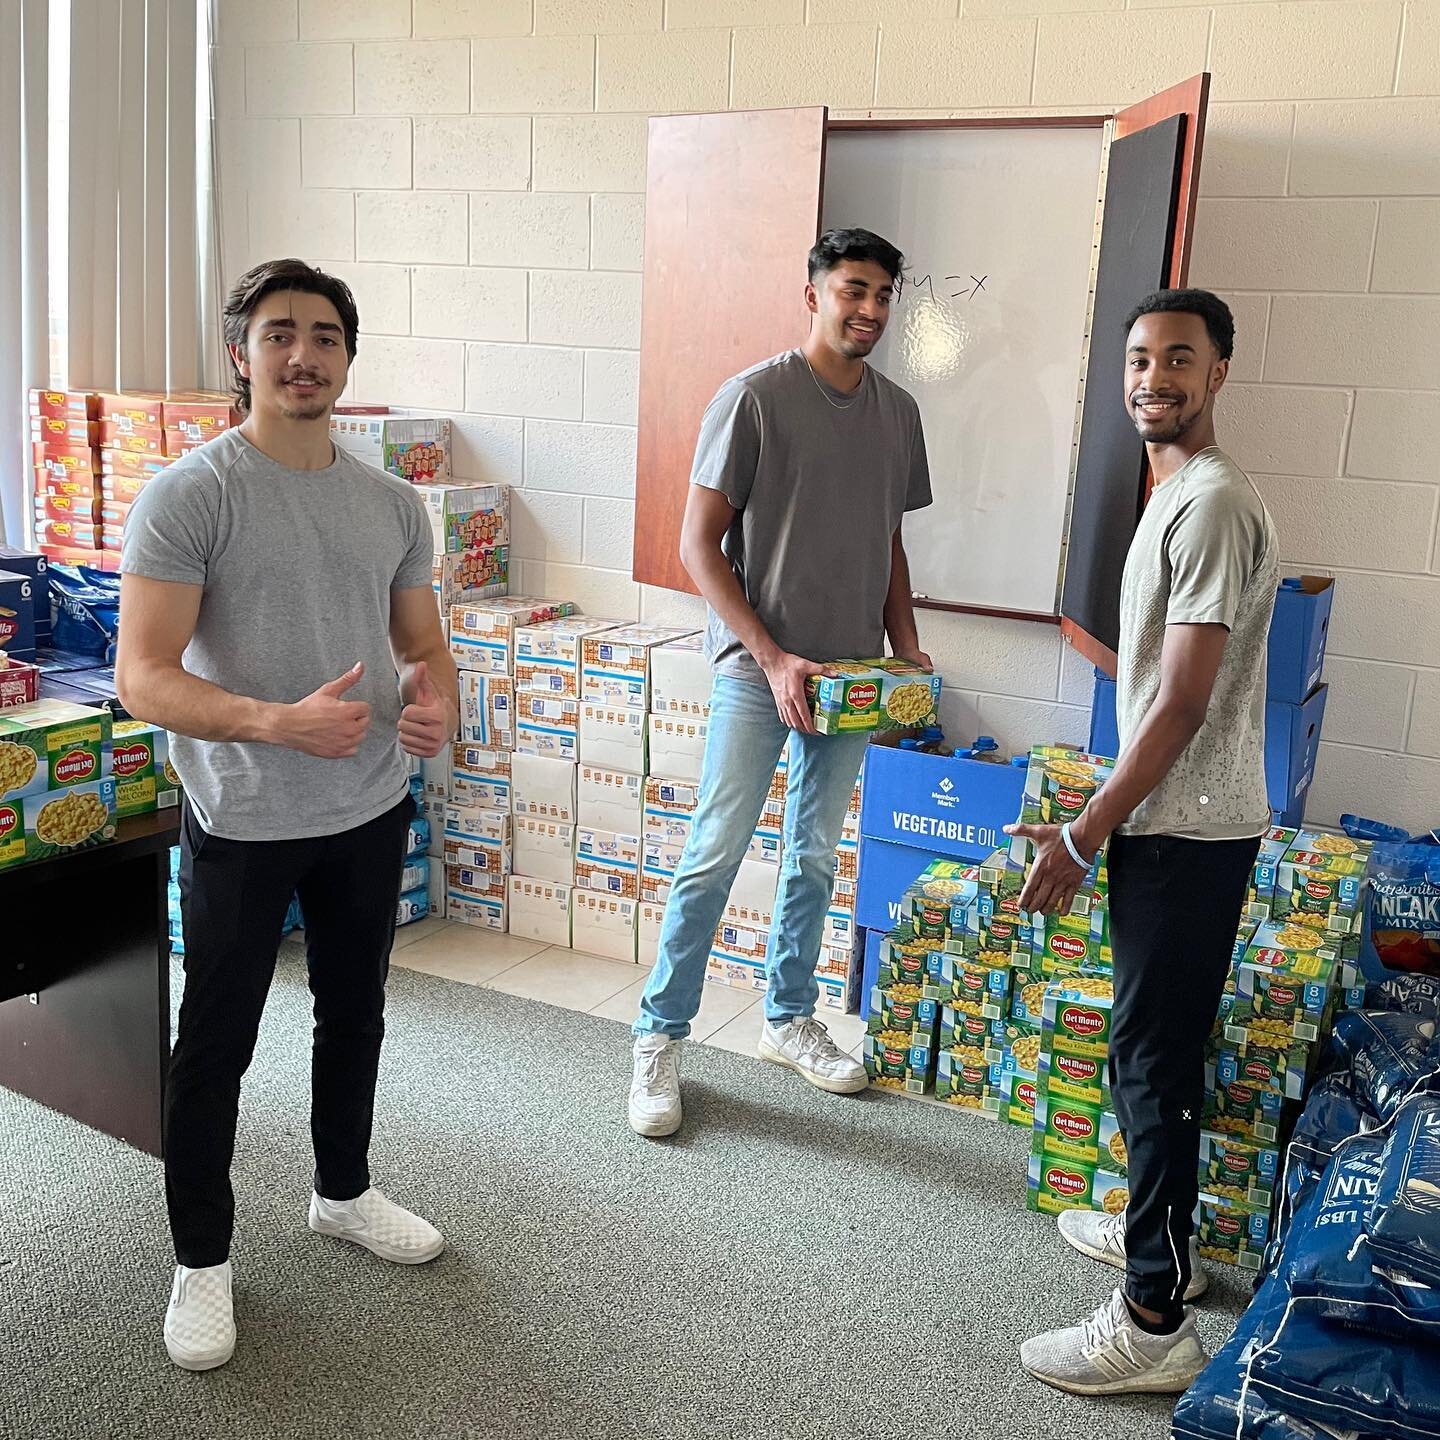 A few of our brothers volunteered their time in the annual Tawheed Center Ramadan Food Drive. They helped distribute over 10,000 pounds of food to 150+ families. Keep up the great work guys!